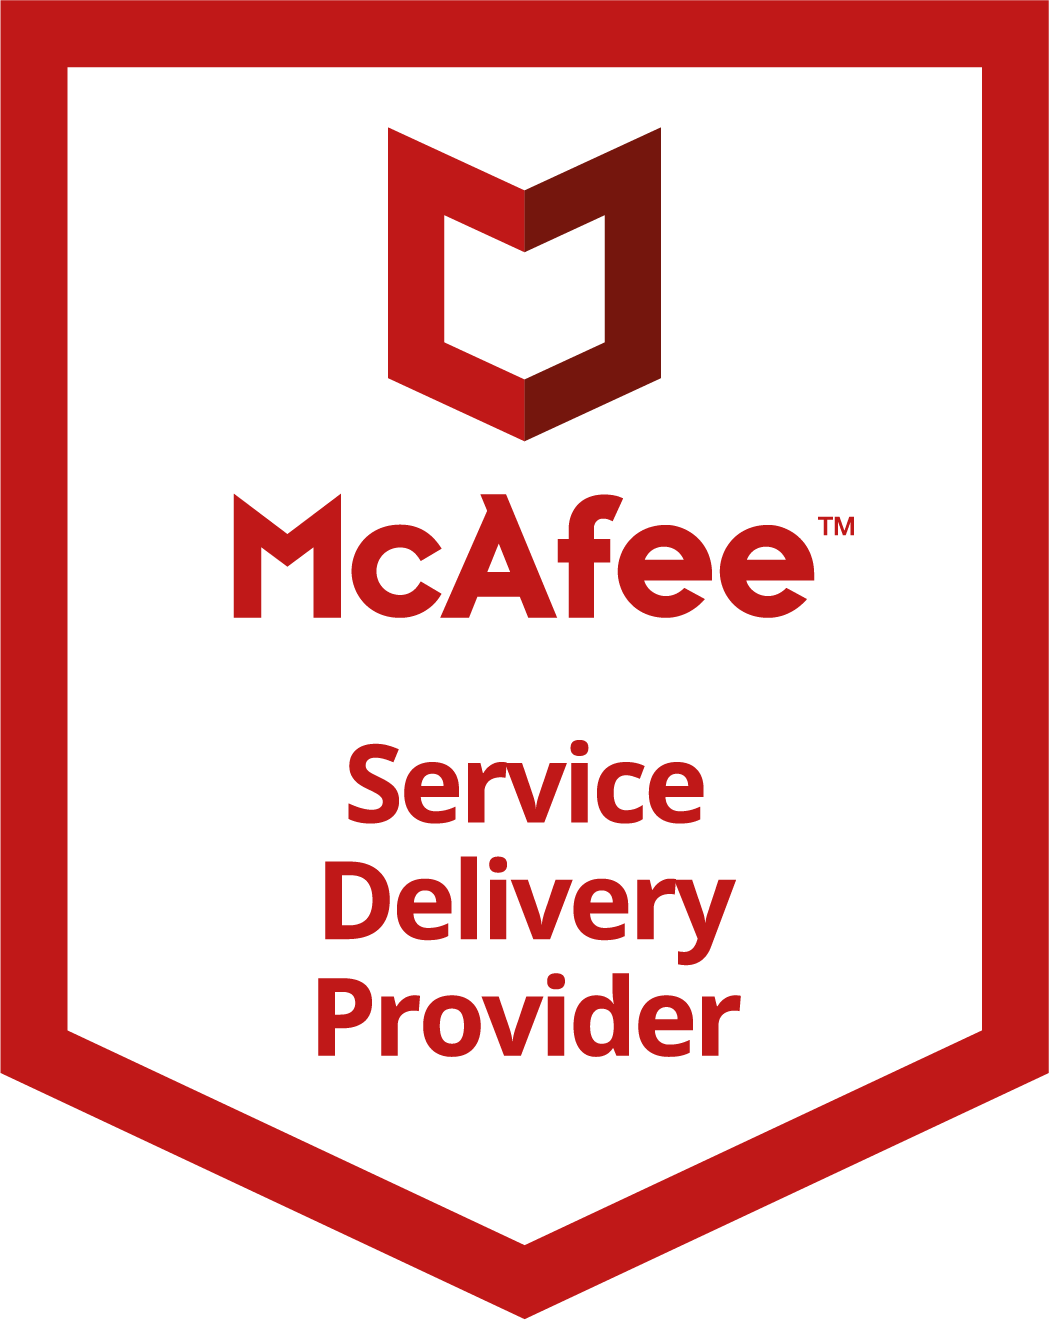 McAFEE_SERVICE_DELIVERY_PROVIDER_RGB